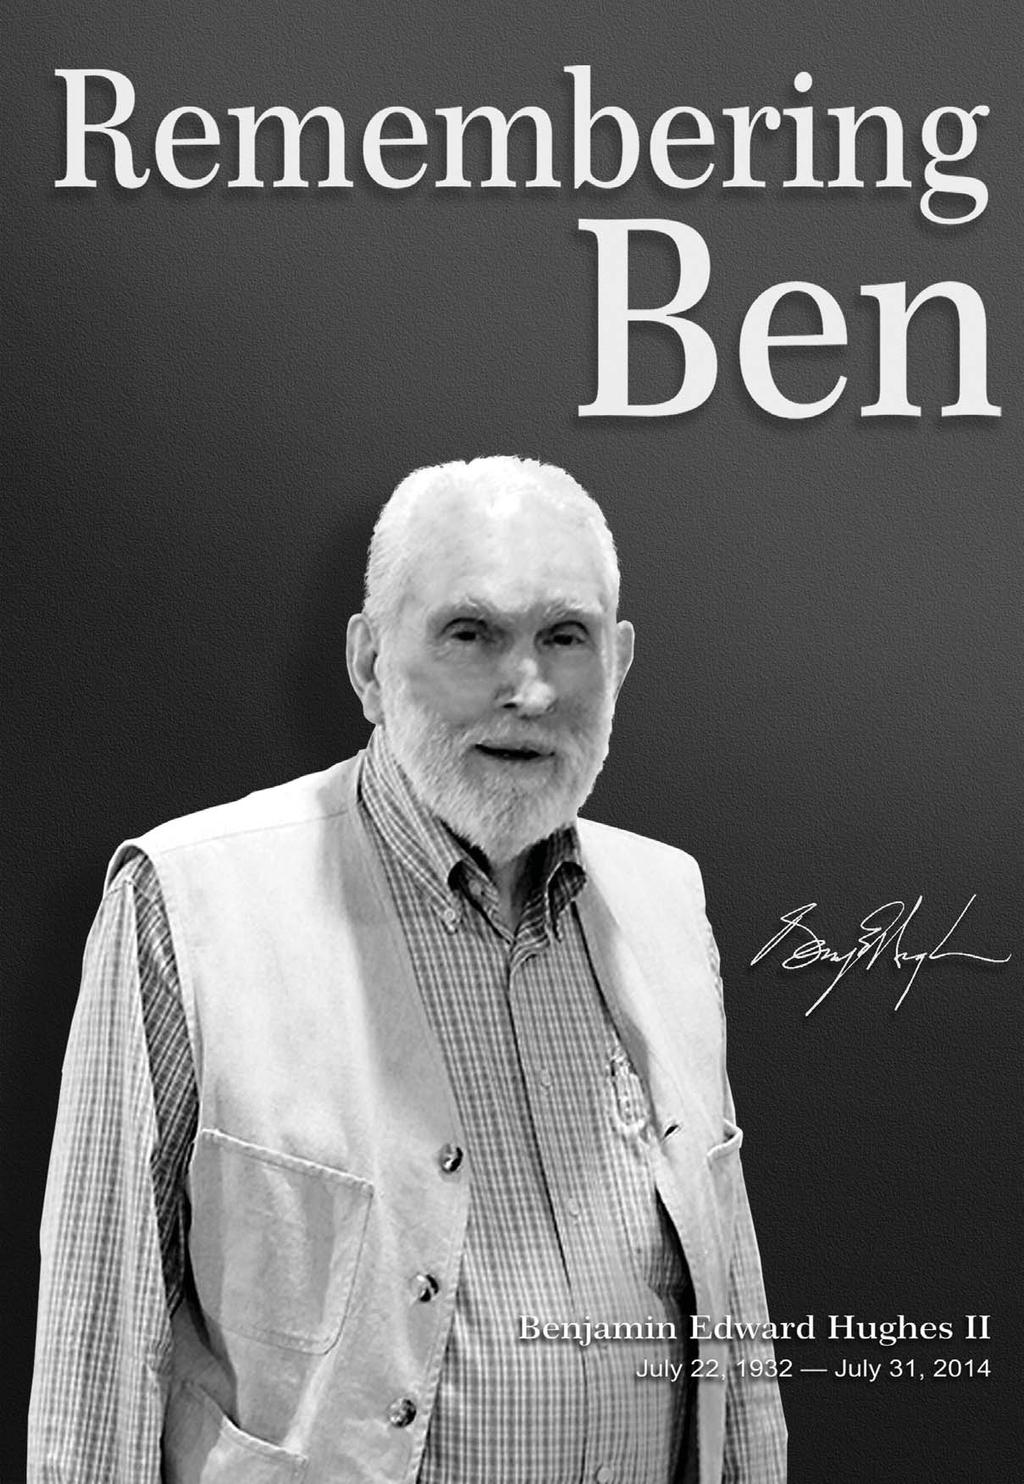 Ben was noted for his distinctive sartorial style wainscots and string ties, decorated with designs featuring elephants; he had a passion for elephants.